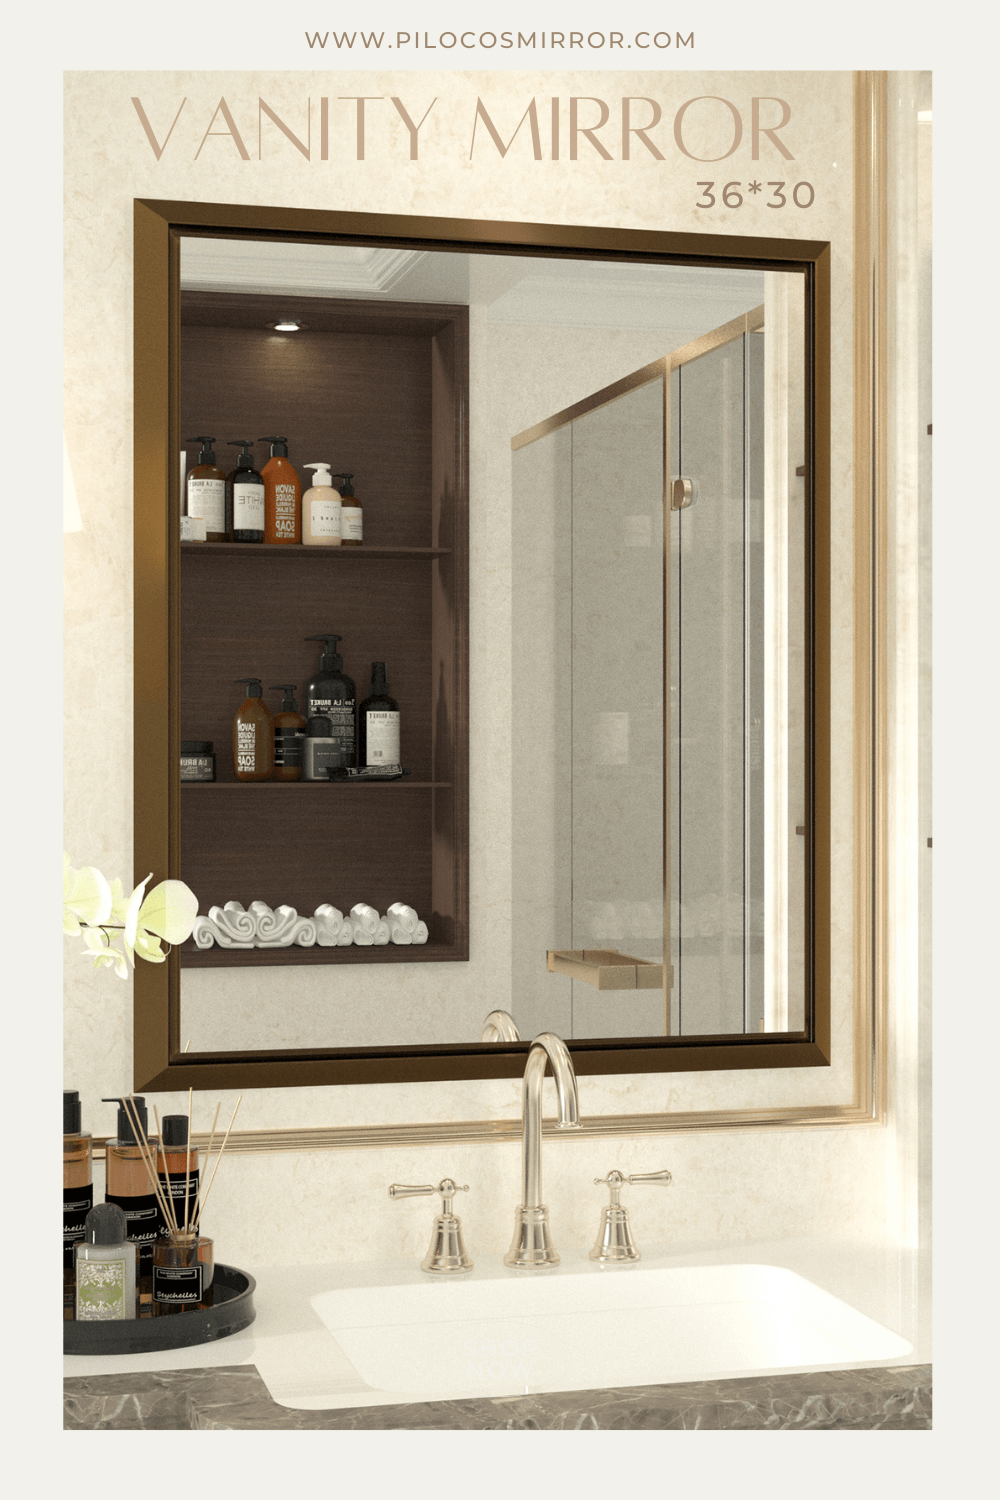 Breathe Life Into Your Home: The Magic of Small Mirrors - PILOCOS